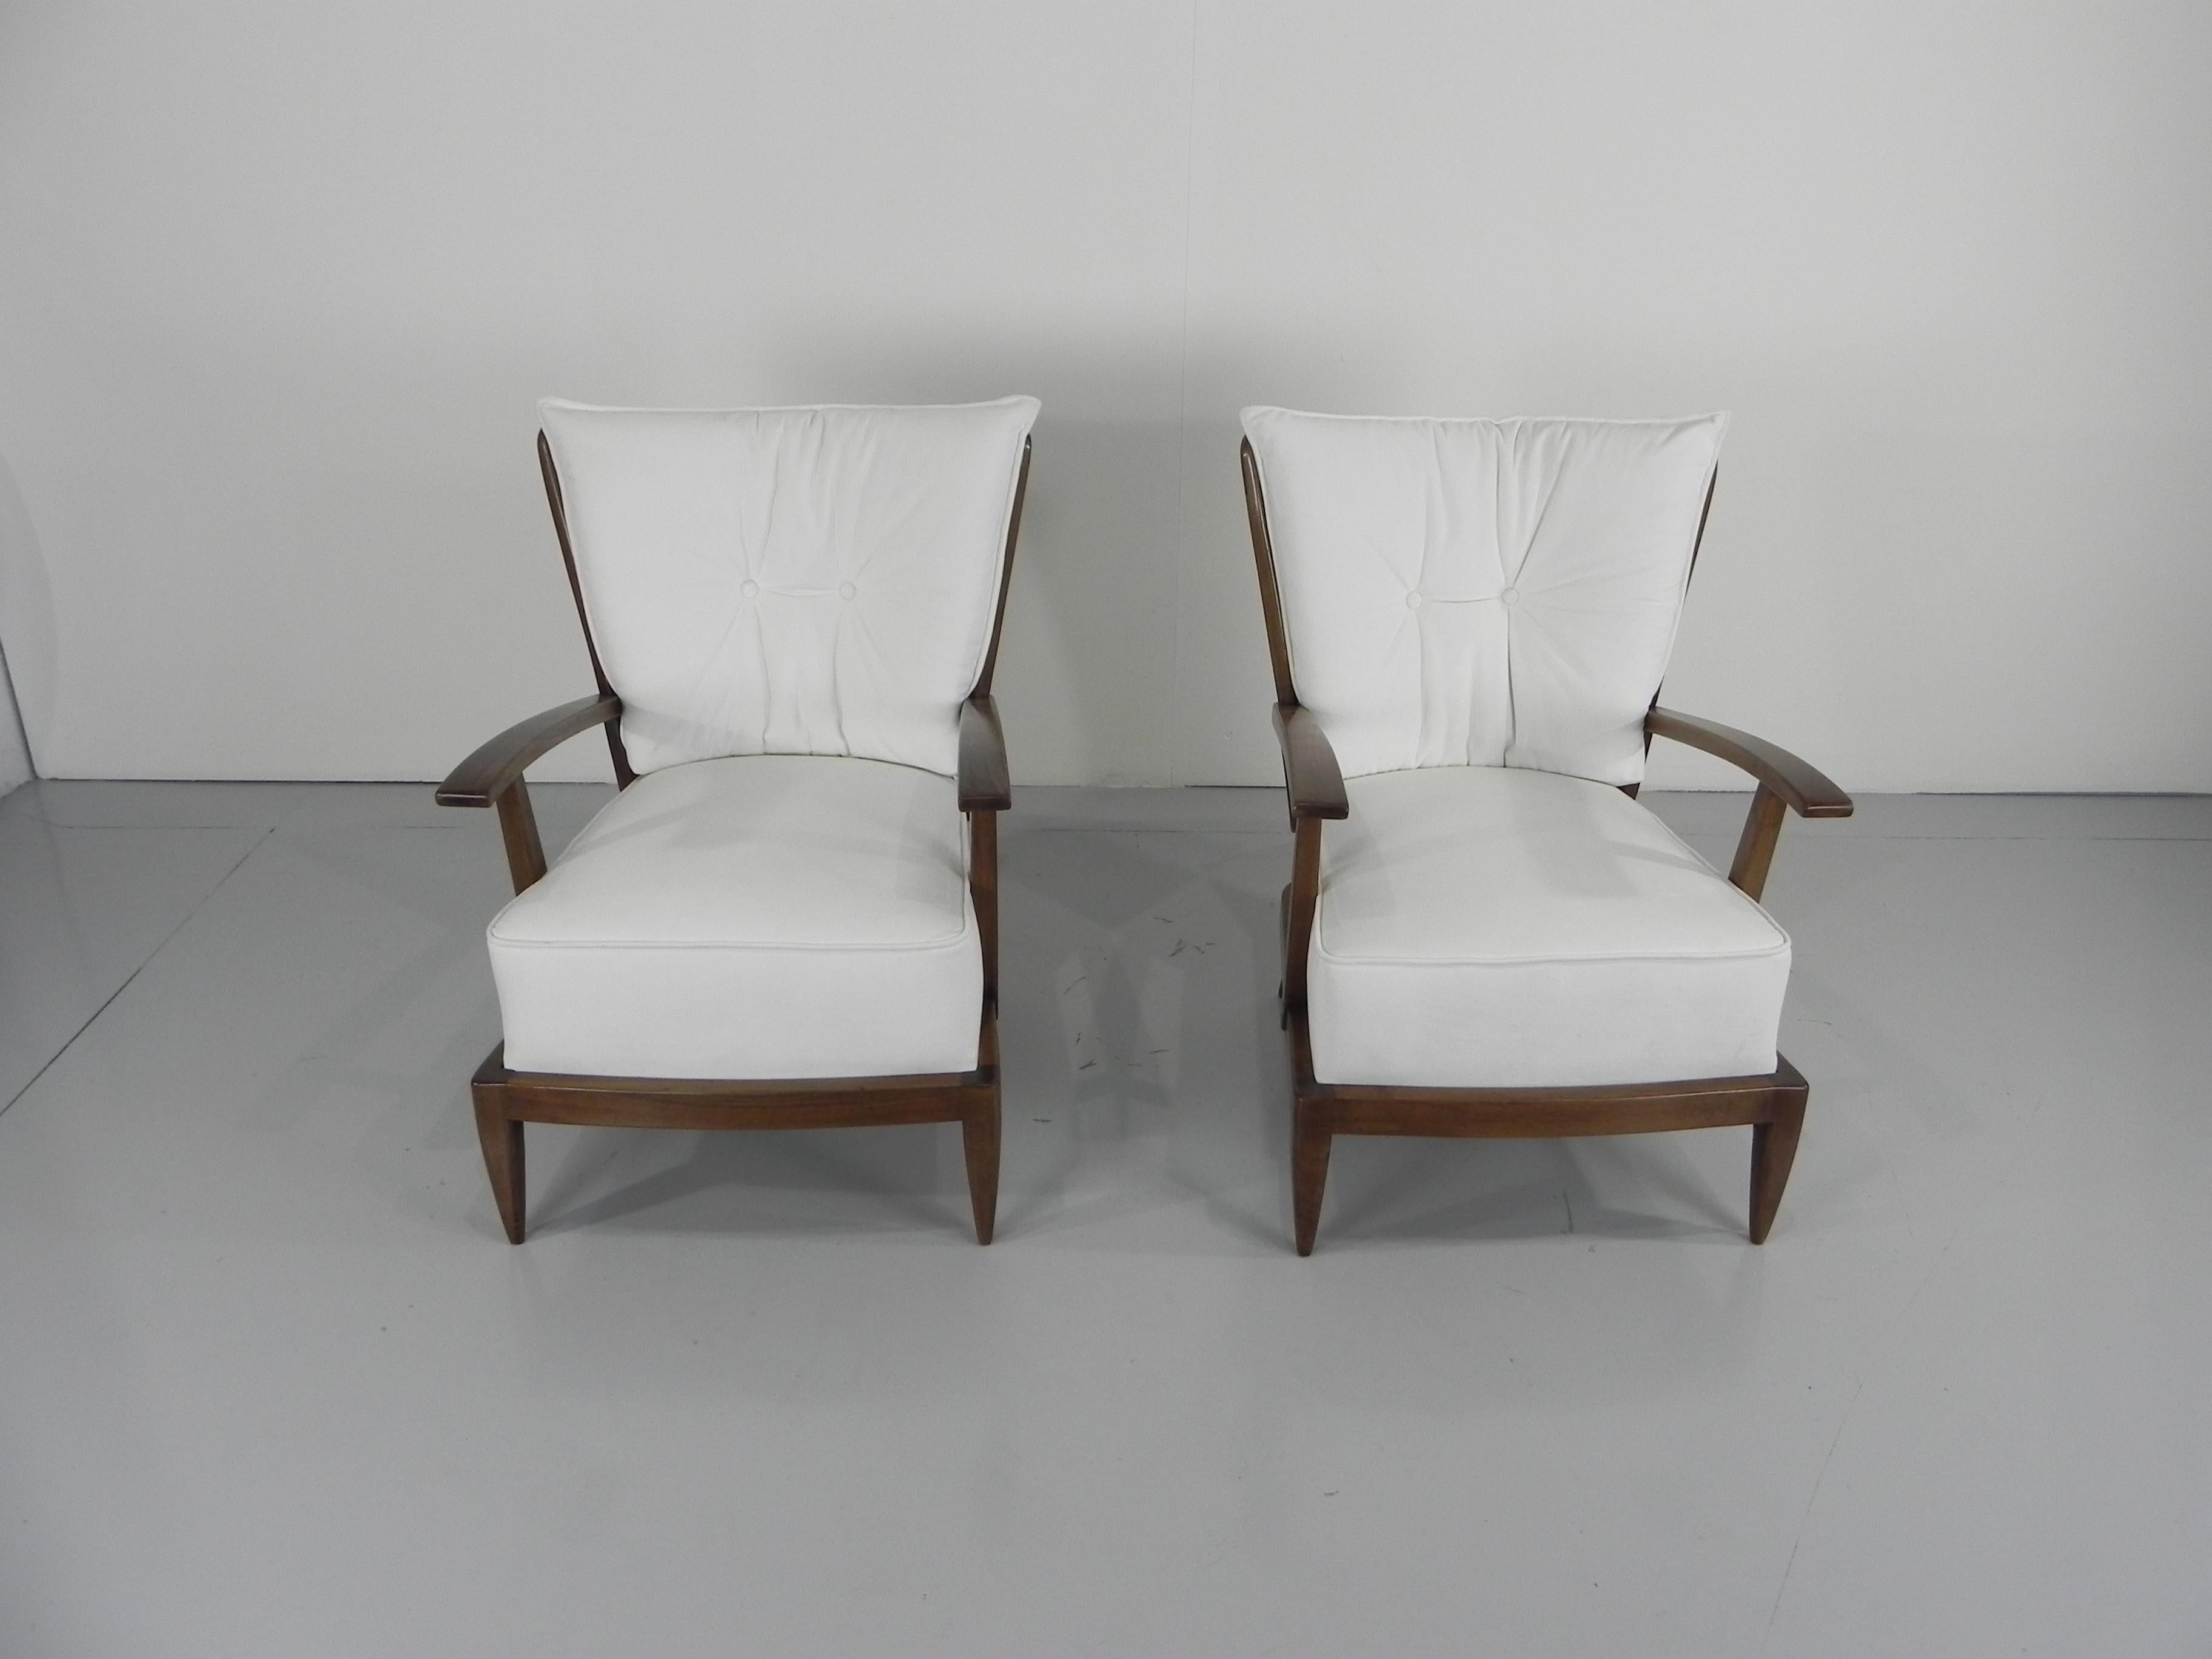 Paolo Buffa (1903-1970). Handsome pair of walnut stained armchairs with spindled back and arms, sculpted armrests and tapered legs, Italy, circa 1950.